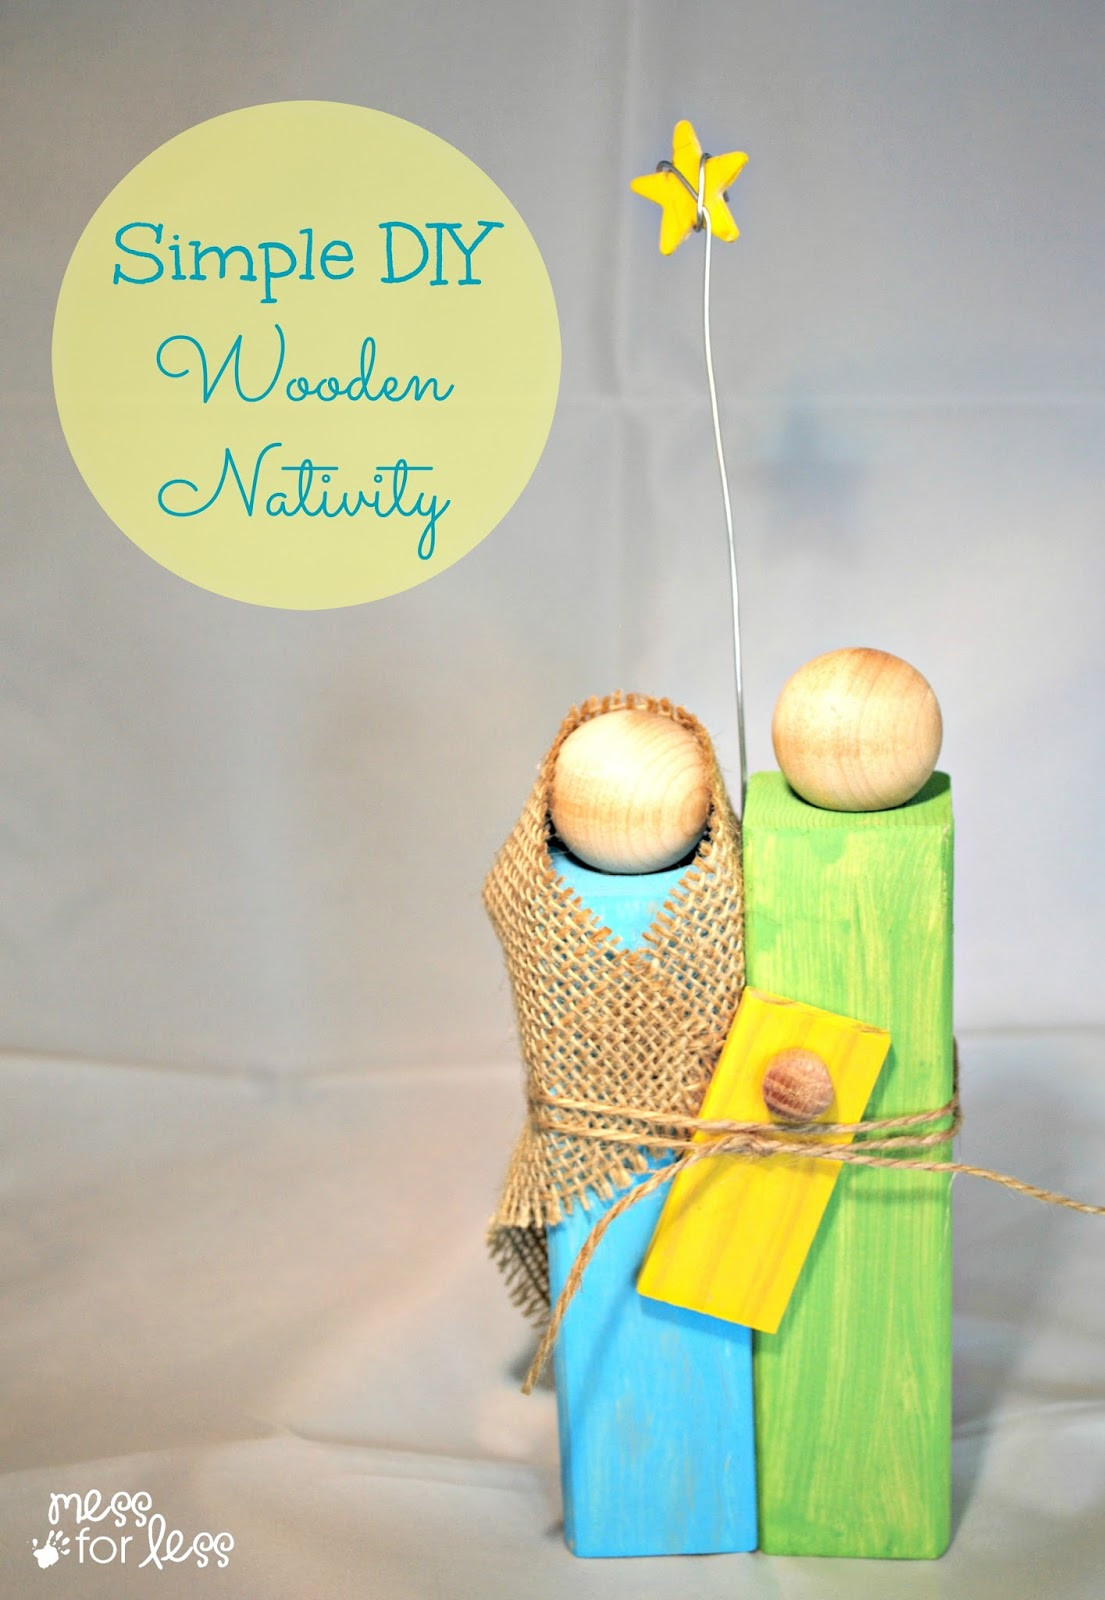 Crafts For Christmas Gifts
 Homemade Christmas Gifts Wooden Nativity Craft Mess